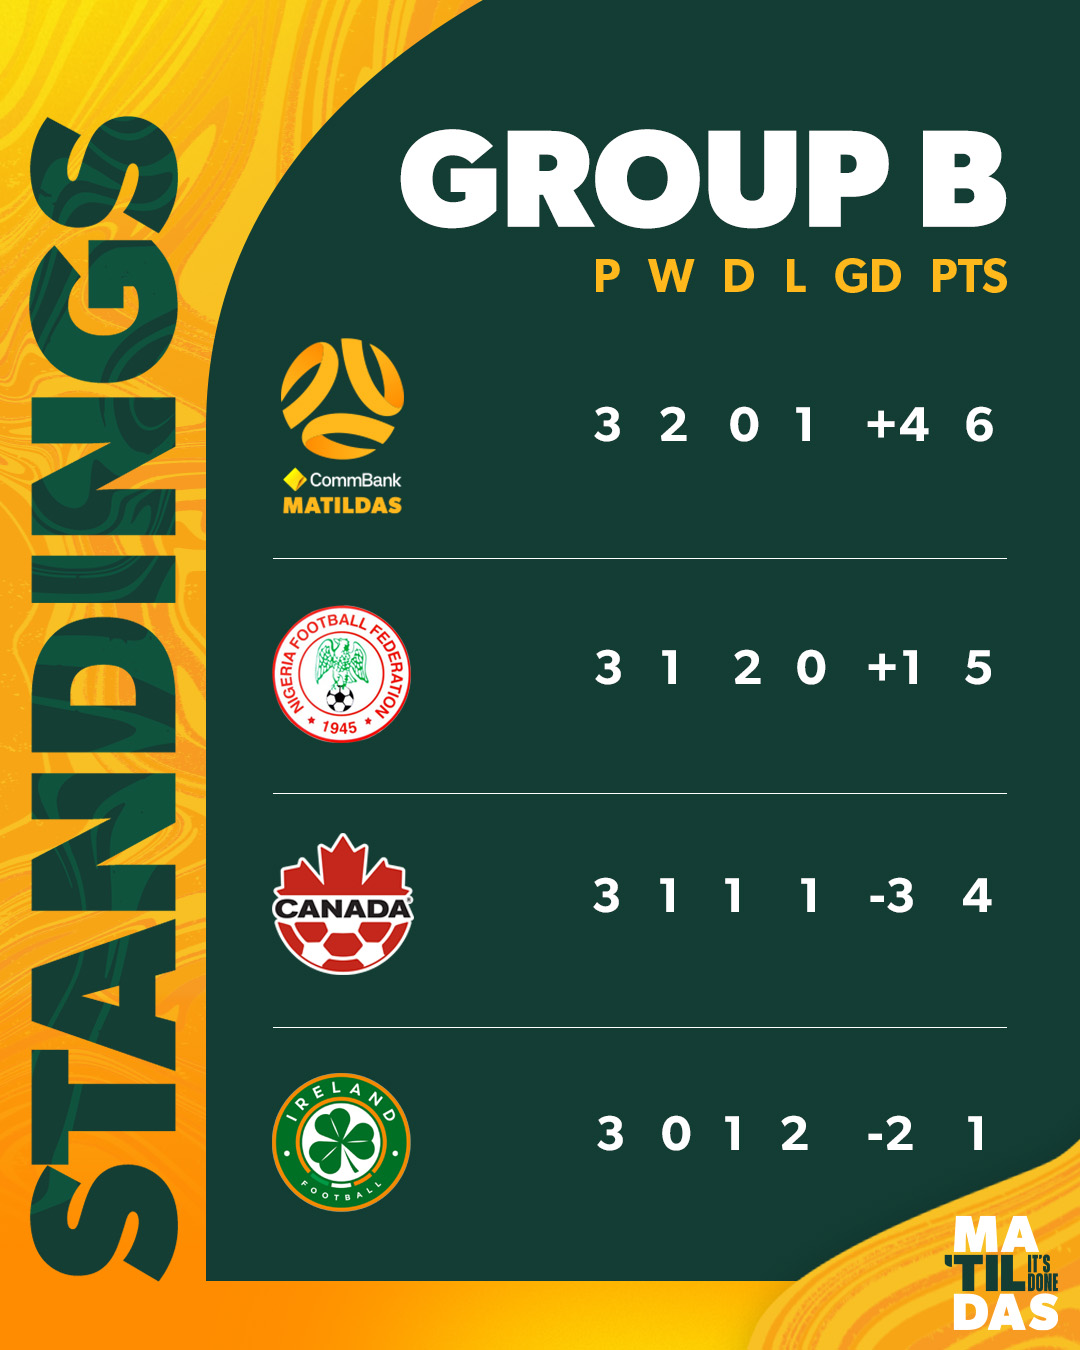 WWC Ladder after game 2 in group stage